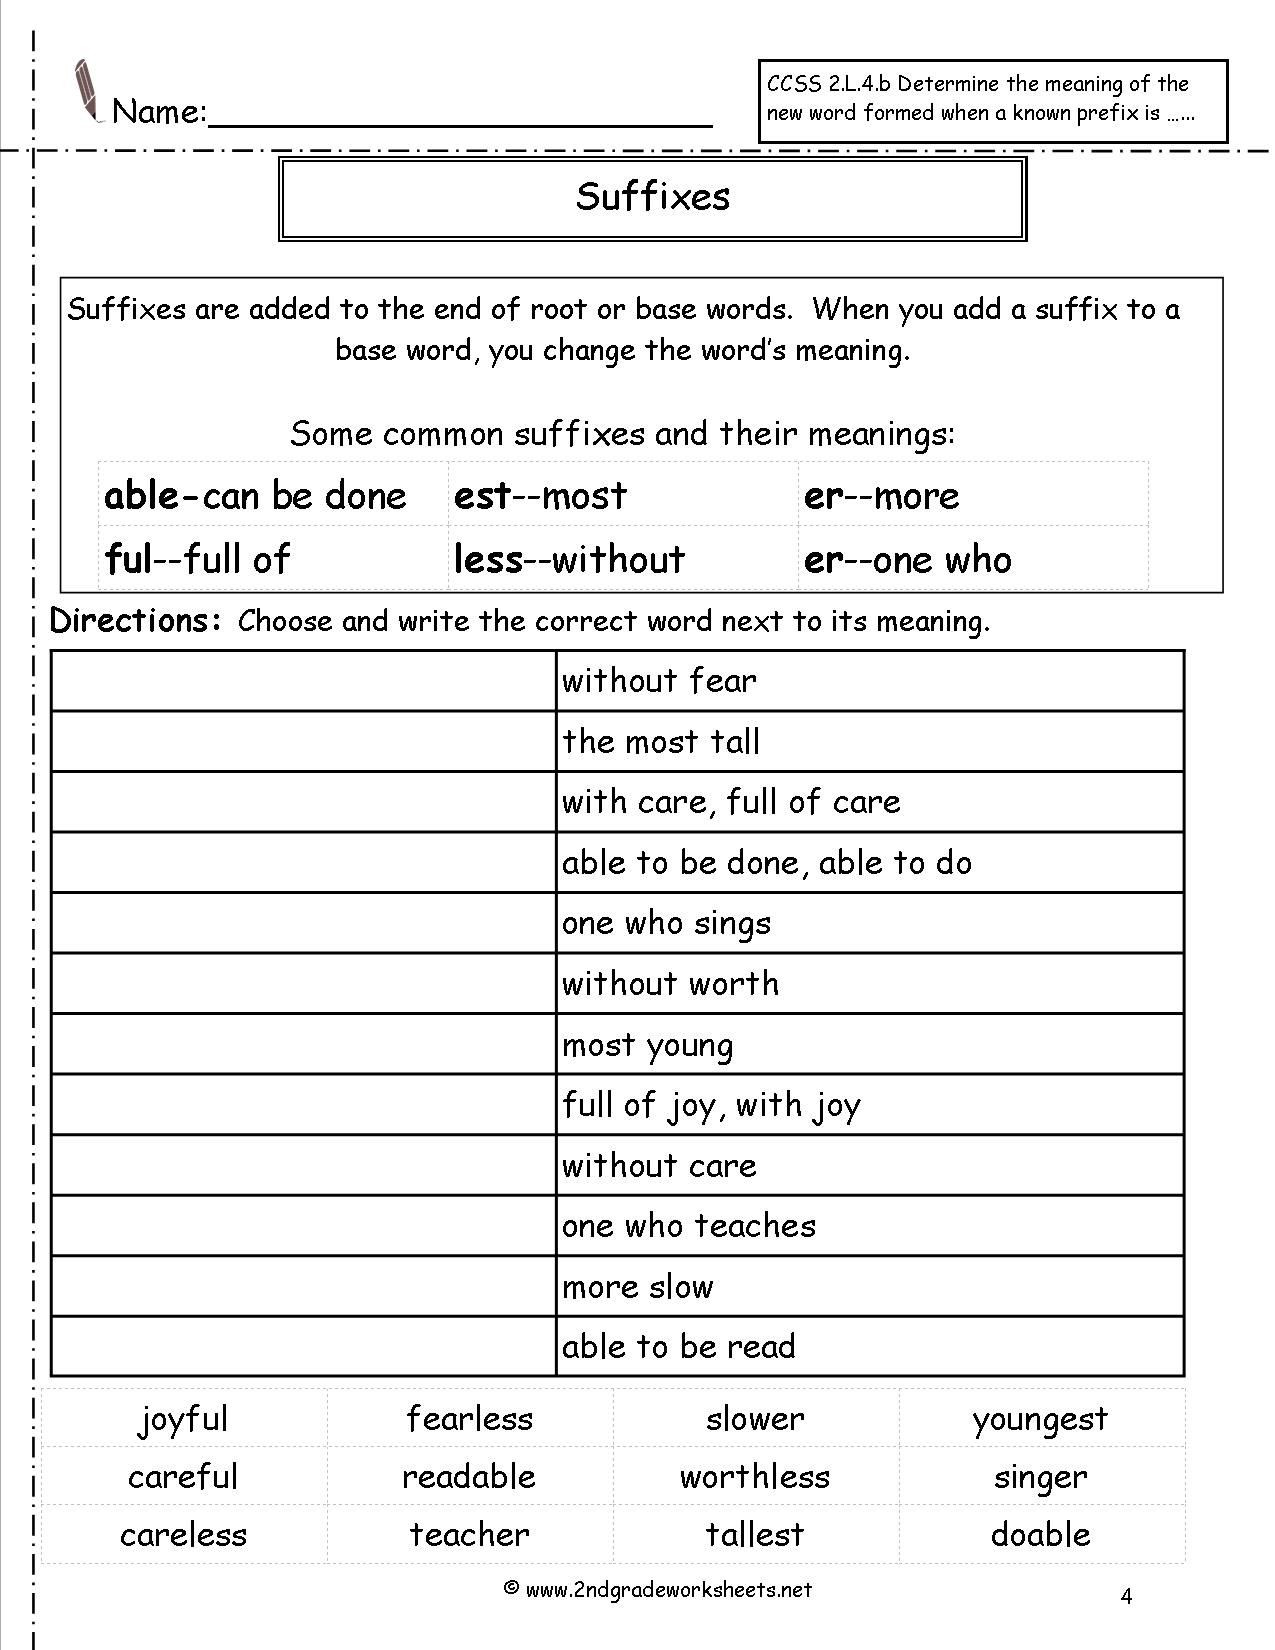 Suffixes Worksheet 3rd Grade Image Result for Prefixes and Suffixes Anchor Chart